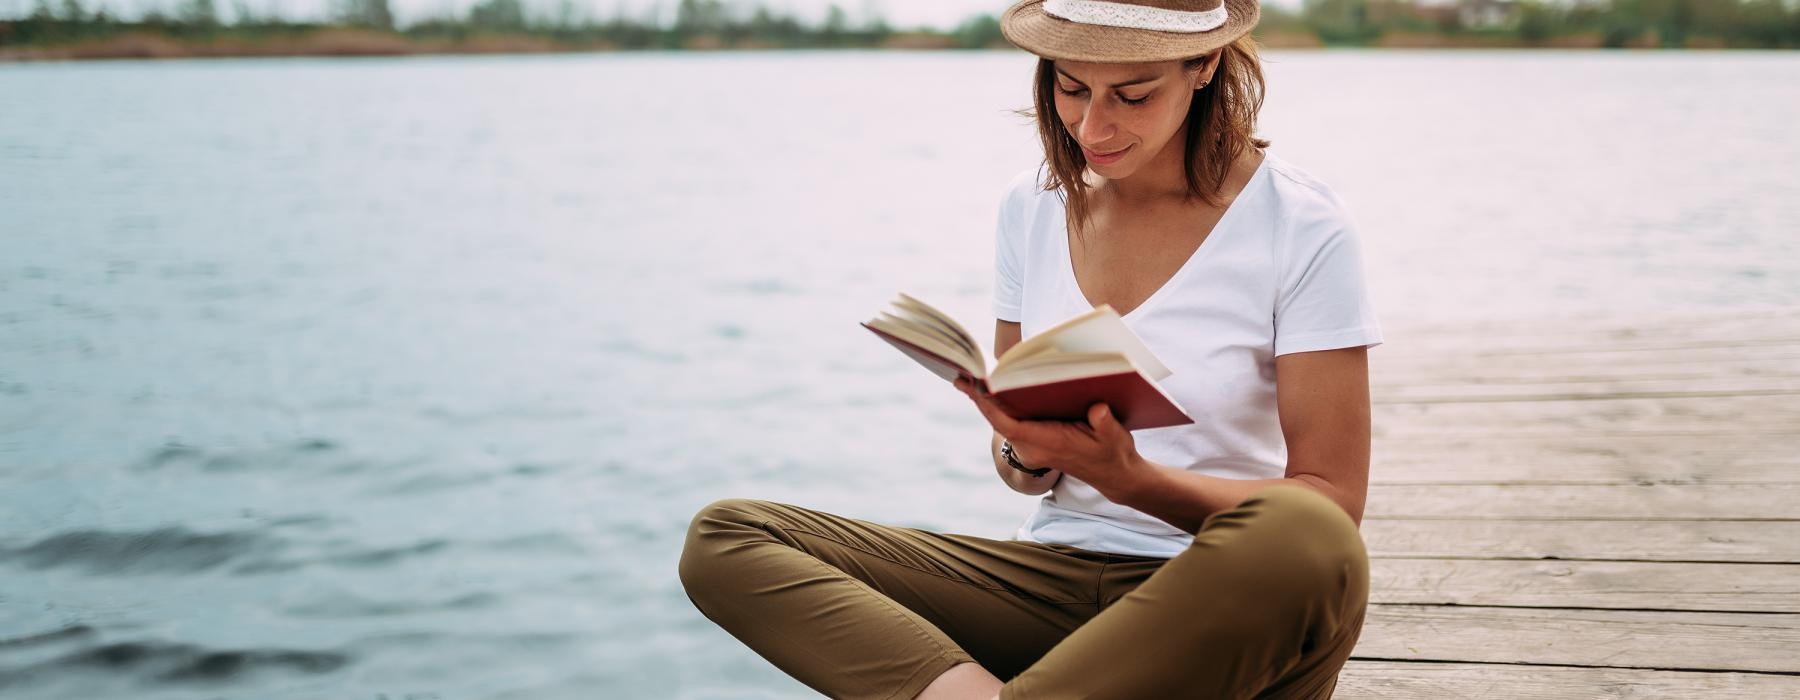 a person sitting on a dock reading a book